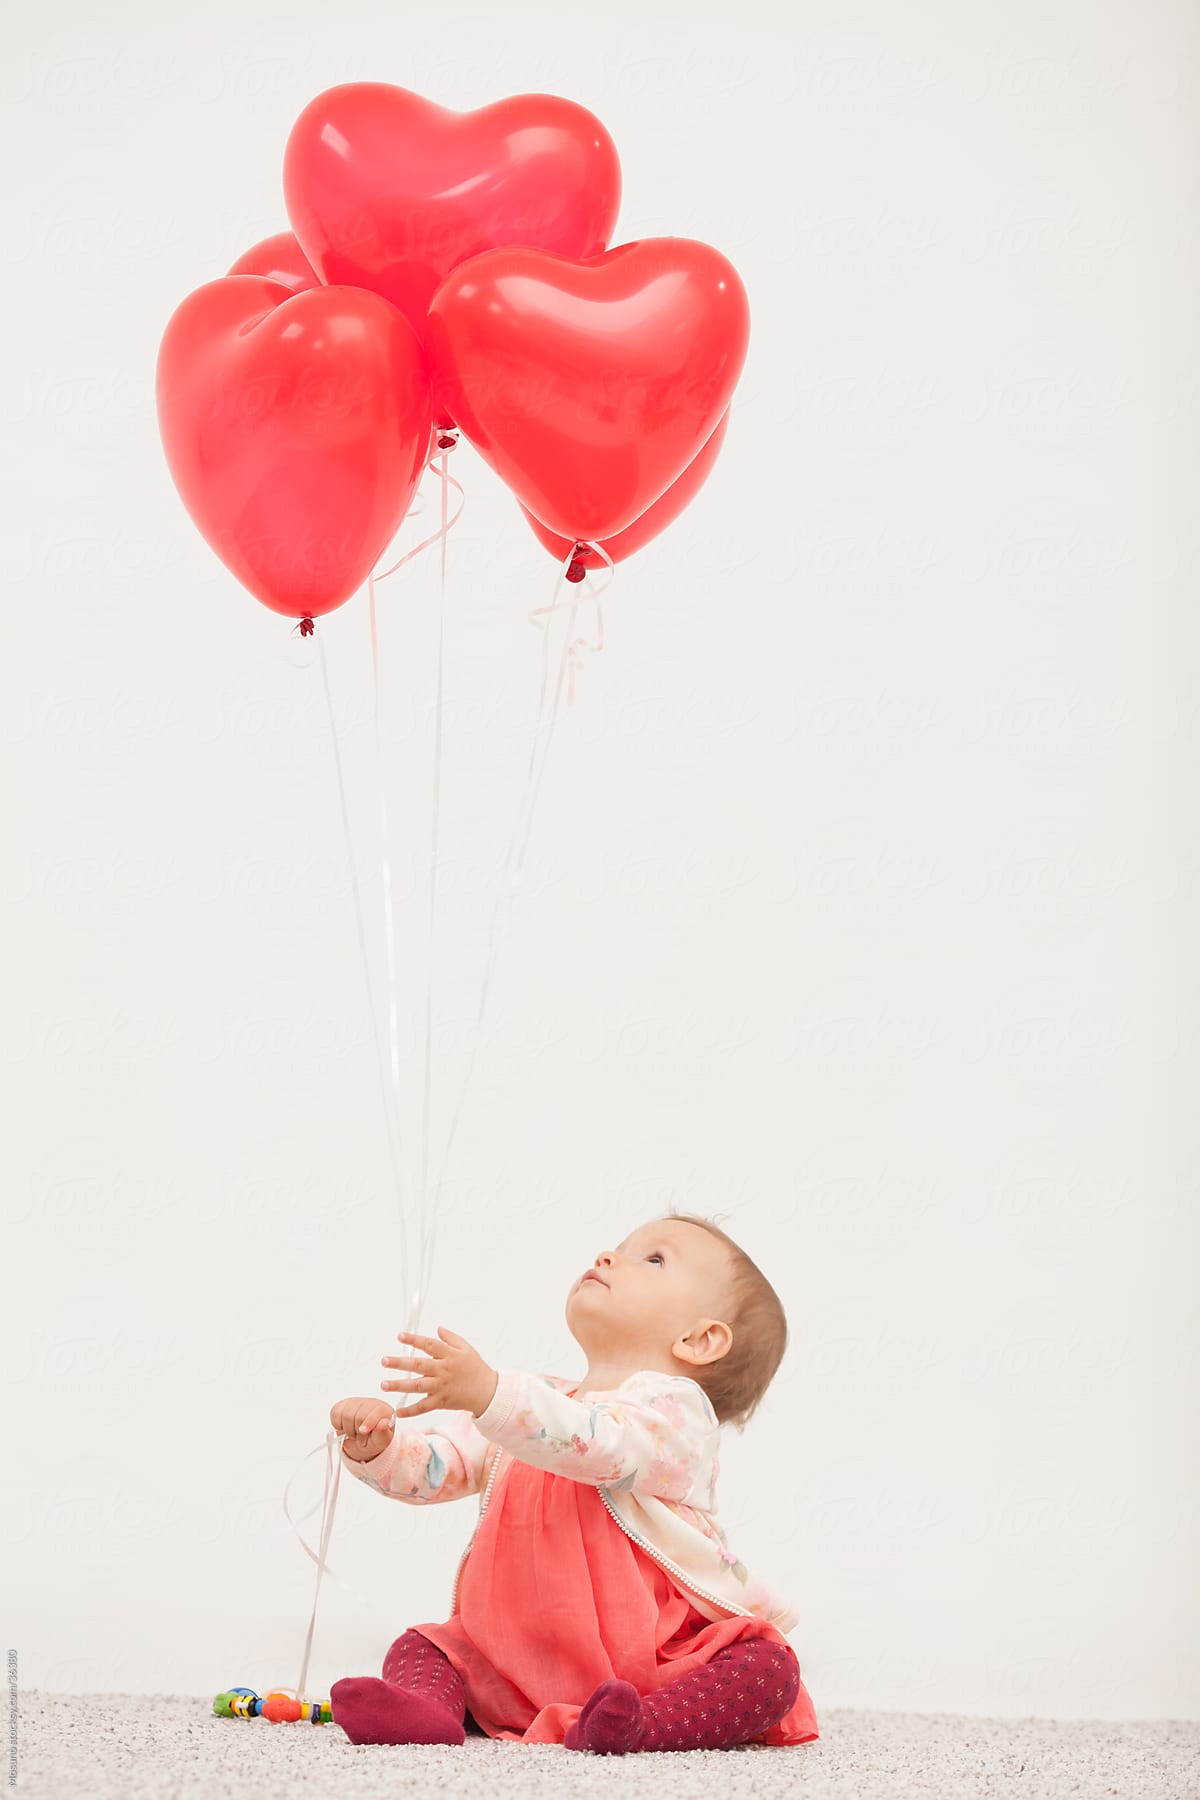 uitblinken een andere Kent Cute Little Baby Girl Playing With Heart Shaped Balloons And Laughing At  Home." by Stocksy Contributor "Mosuno" - Stocksy